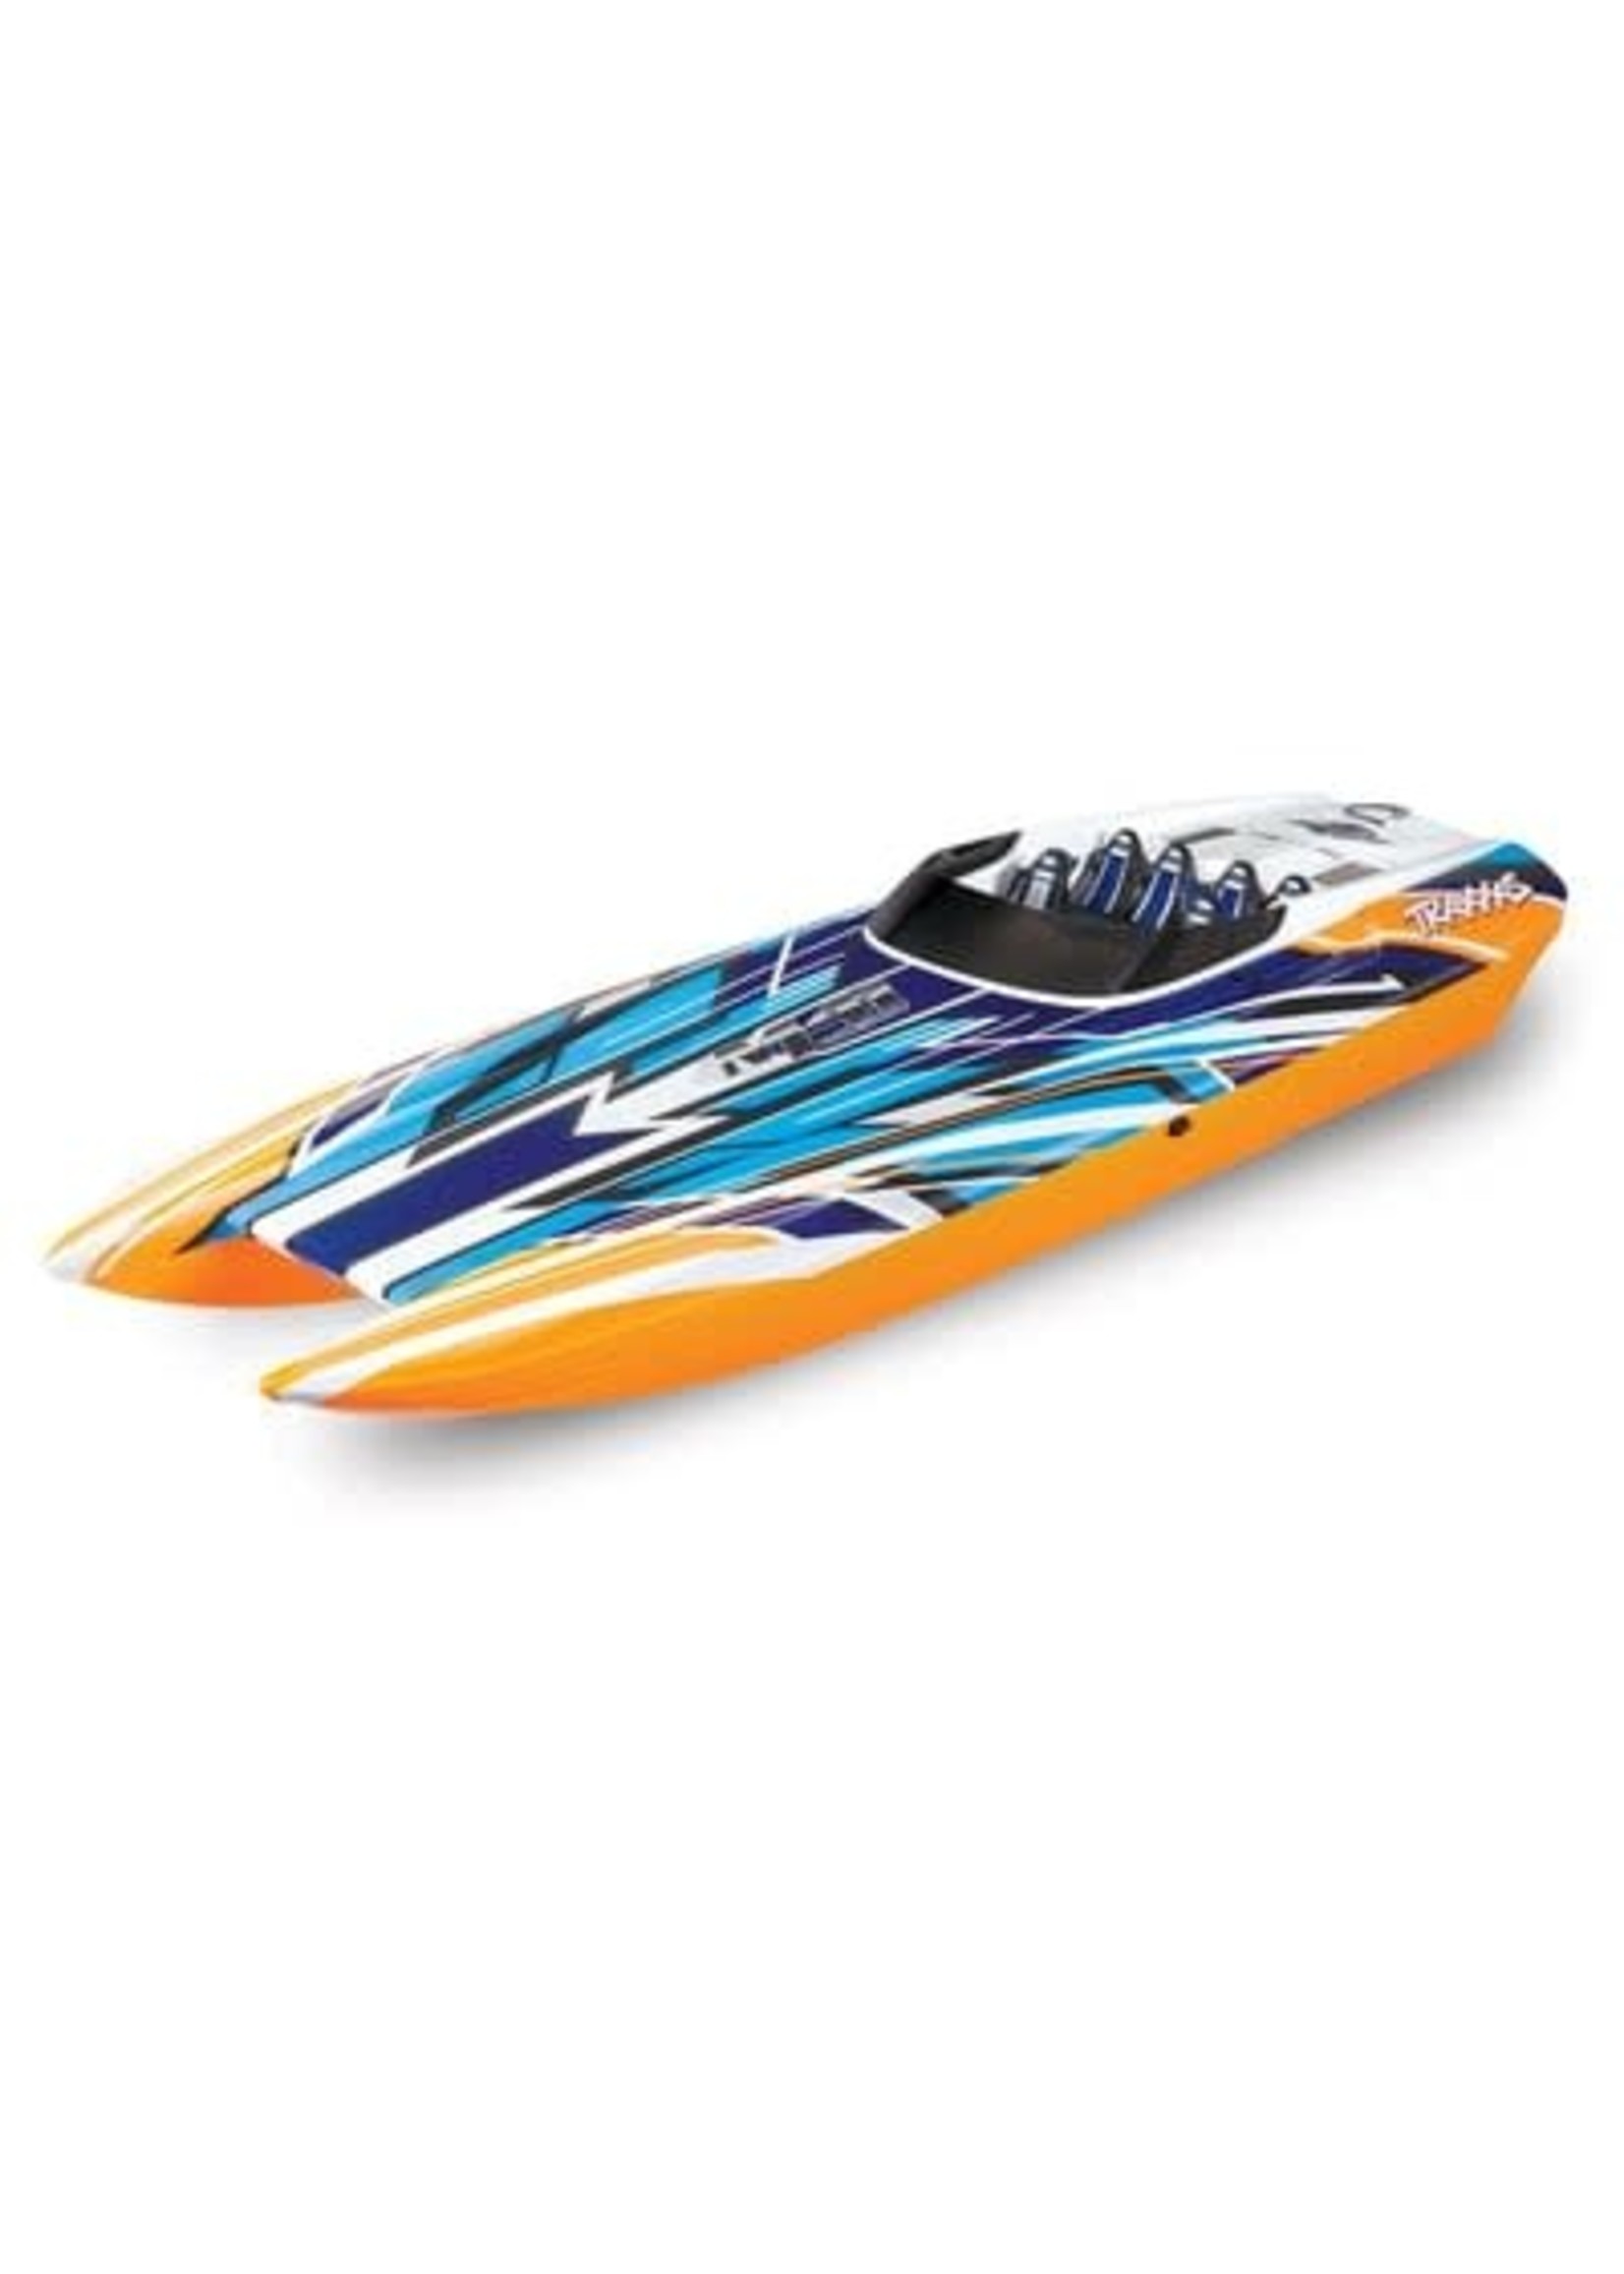 Traxxas 57046-4-ORNGX DCB M41 Widebody: Brushless 40' Race Boat with TQi Traxxas Link  Enabled 2.4GHz Radio System & Traxxas Stability Management (TSM)